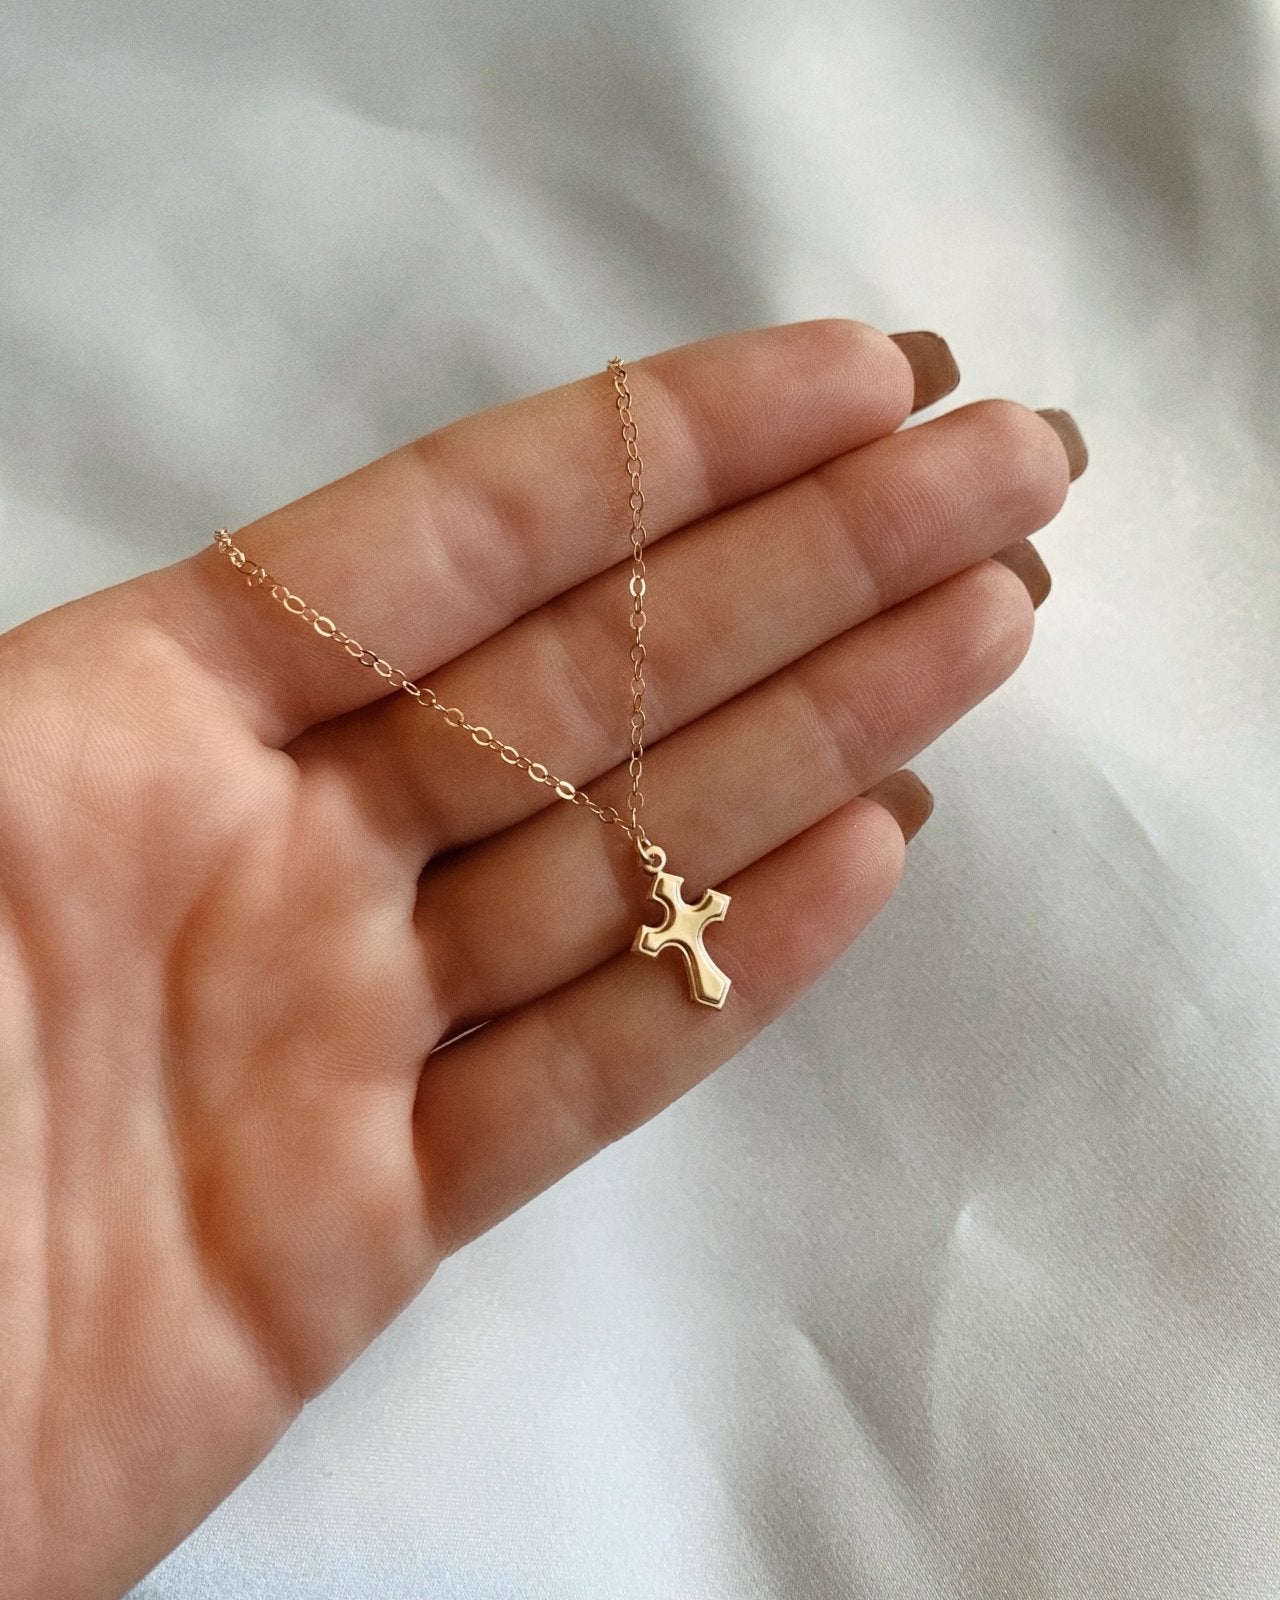 FLARED CROSS NECKLACE - The Littl - Deluxe Chain - 14k Yellow Gold Fill